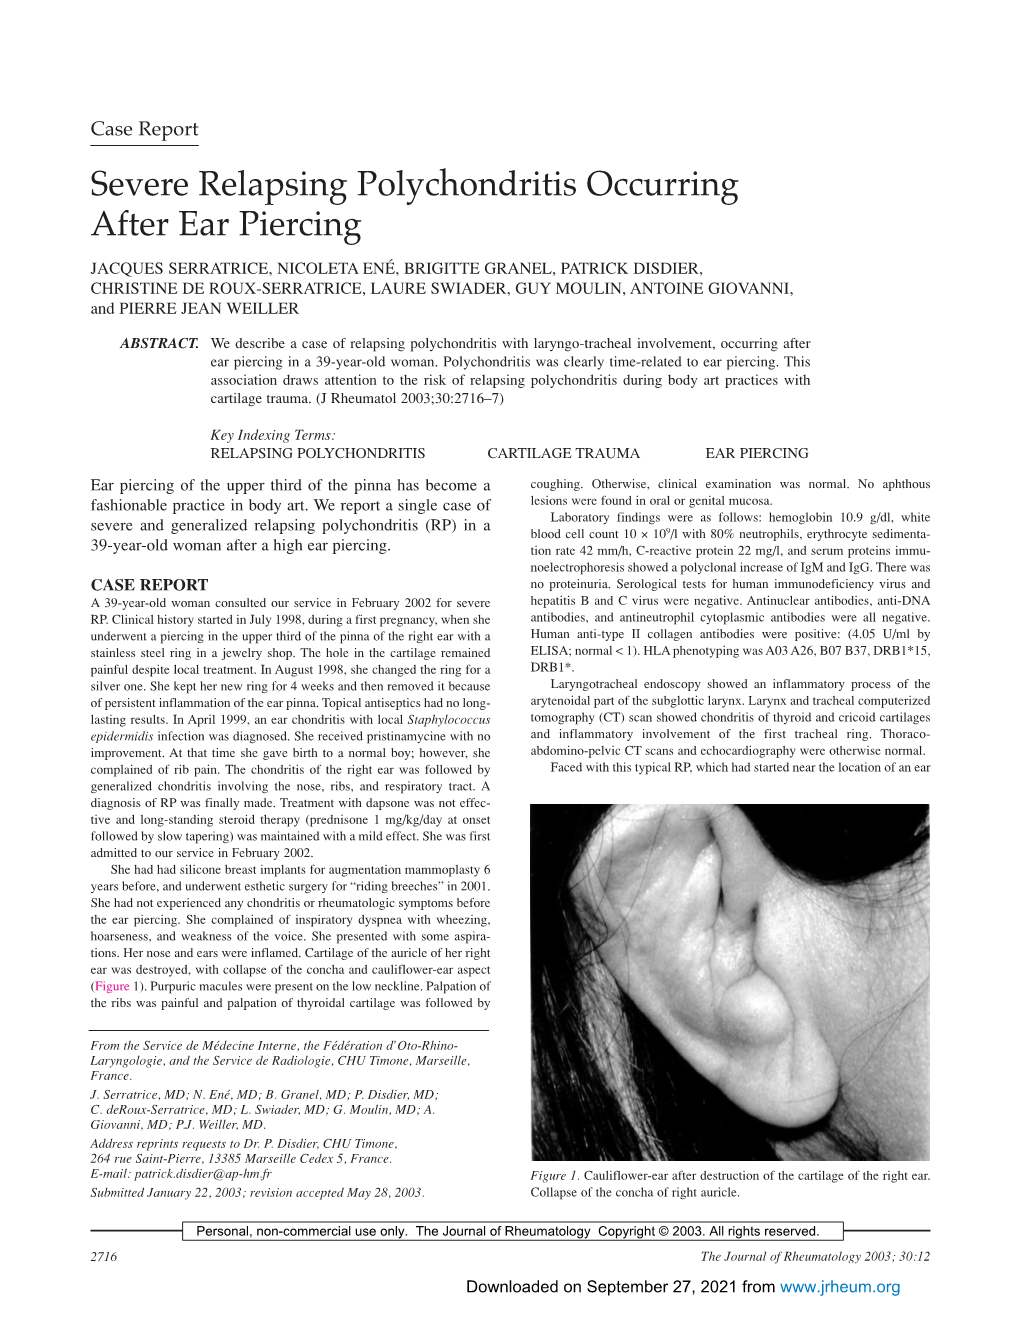 Severe Relapsing Polychondritis Occurring After Ear Piercing